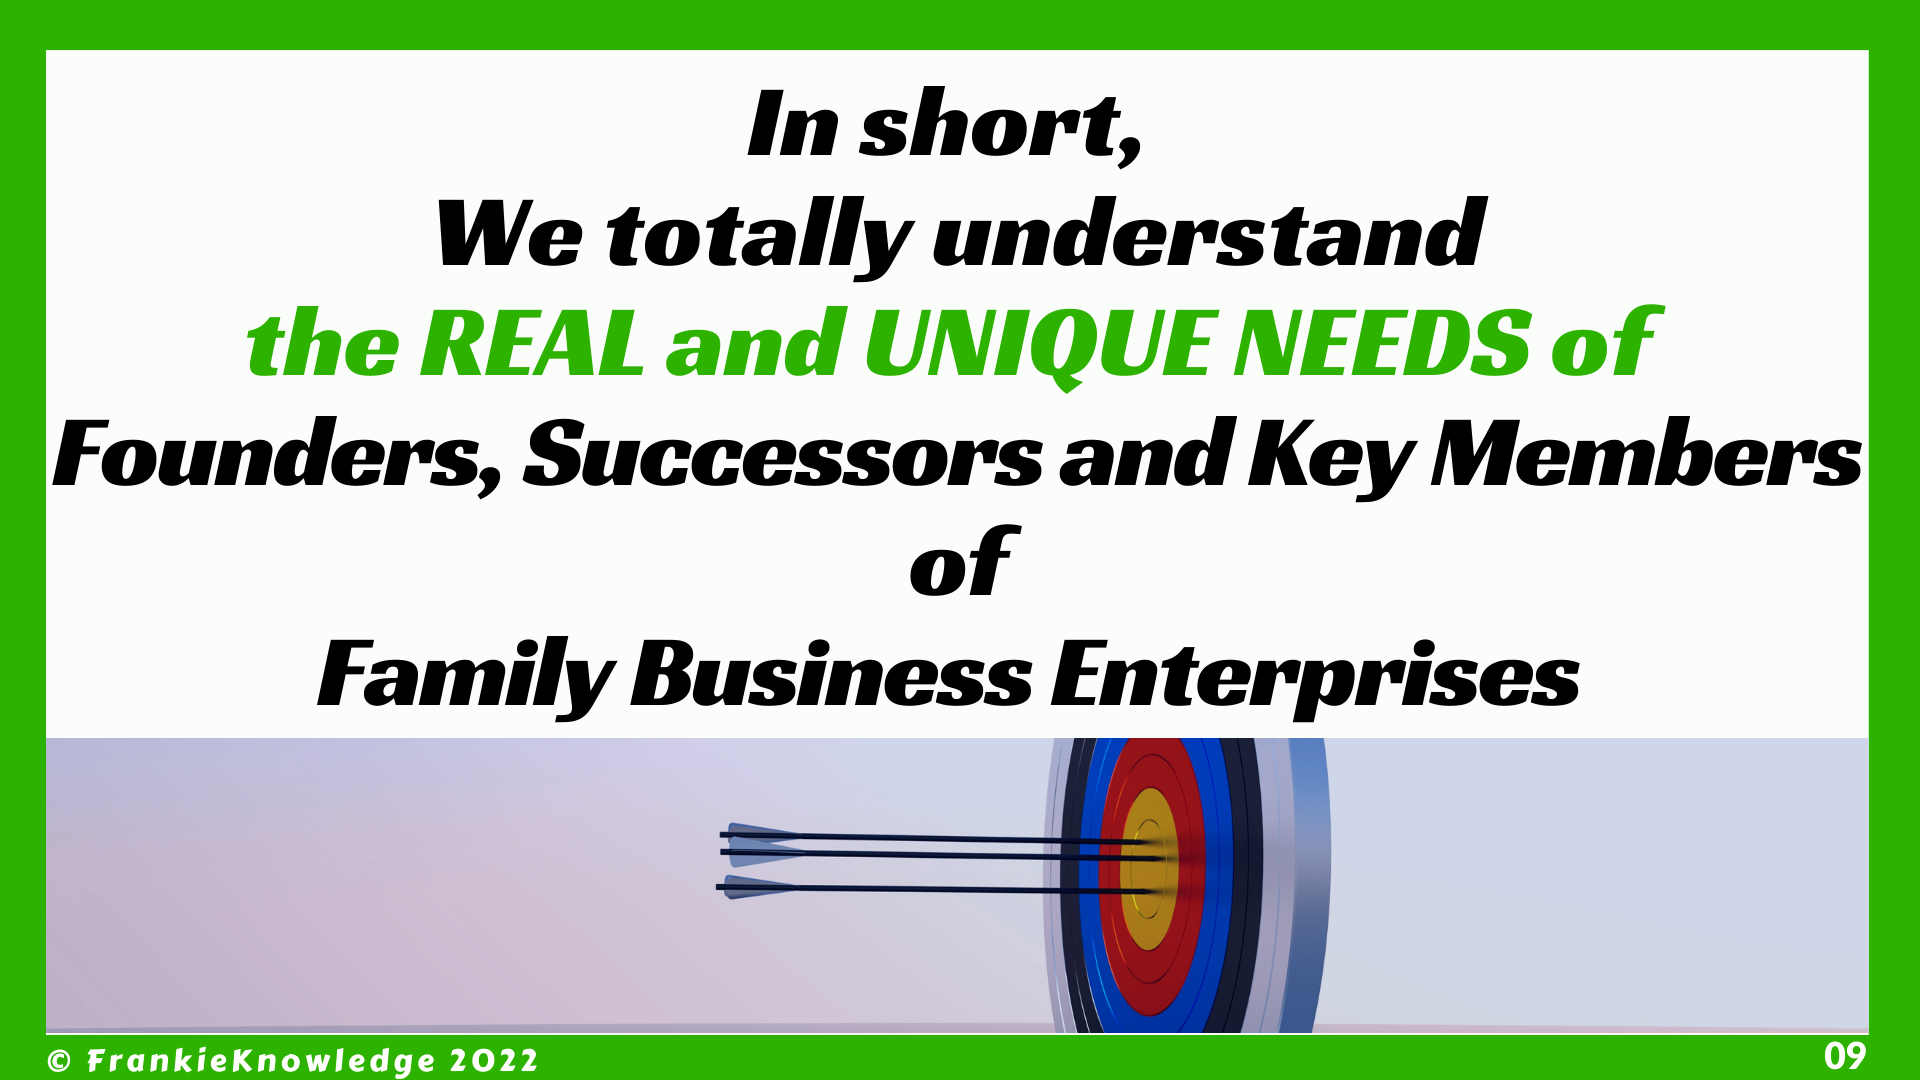 FrankieKnowledge totally understands the REAL and UNIQUE NEEDS of Founders, Successors and Key Members of Family Business Enterprises 